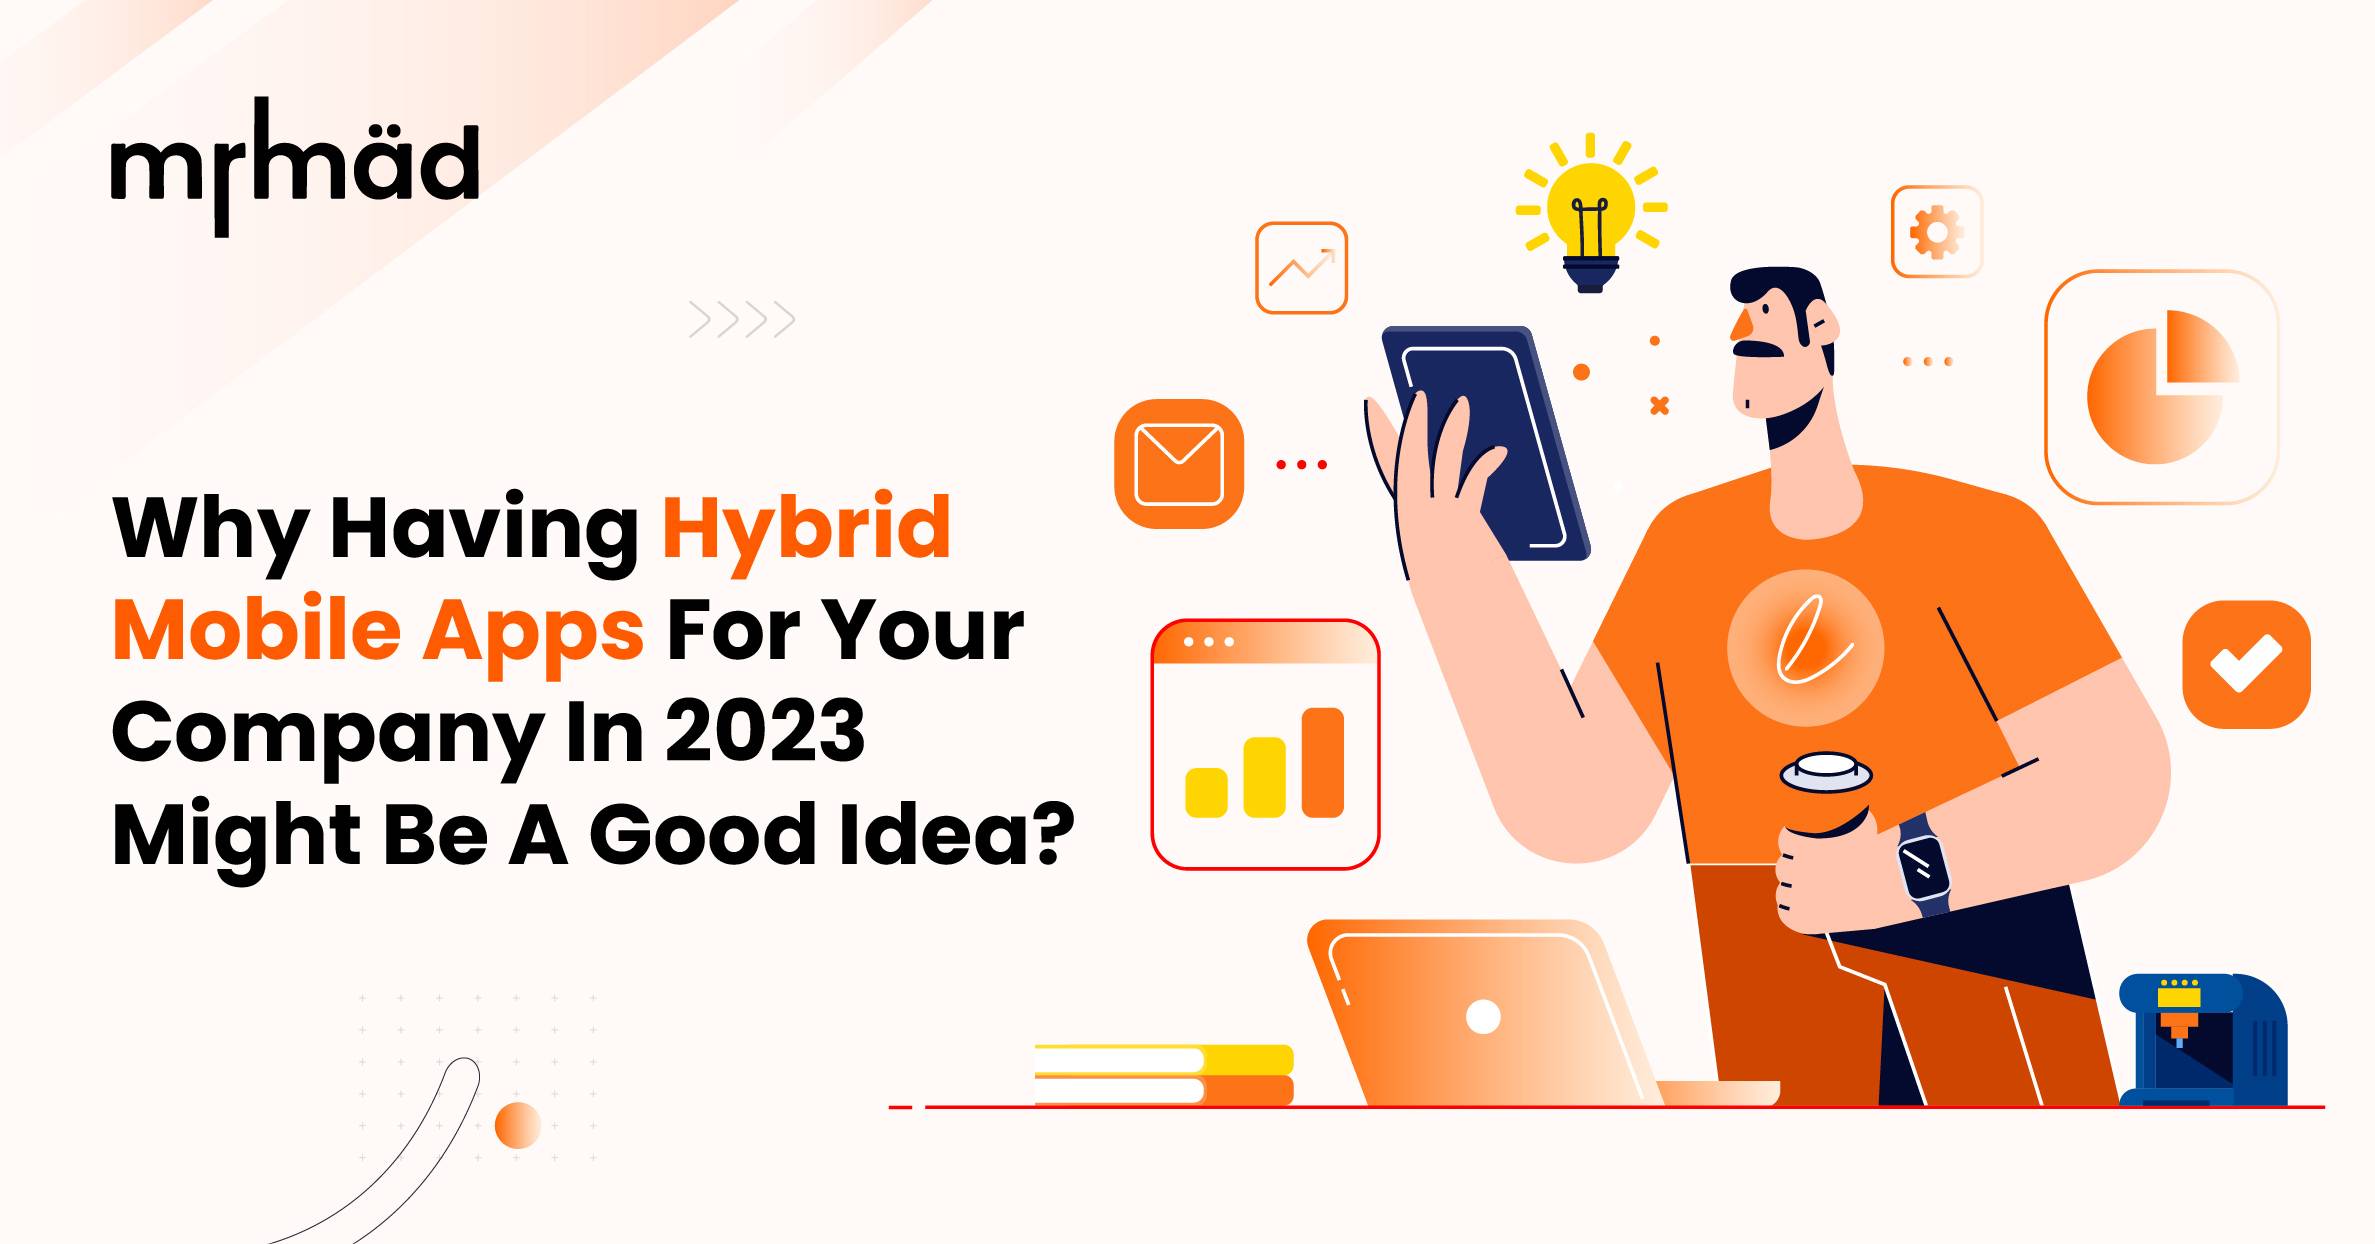 Why Having Hybrid Mobile Apps For Your Company In 2023 Might Be A Good Idea?